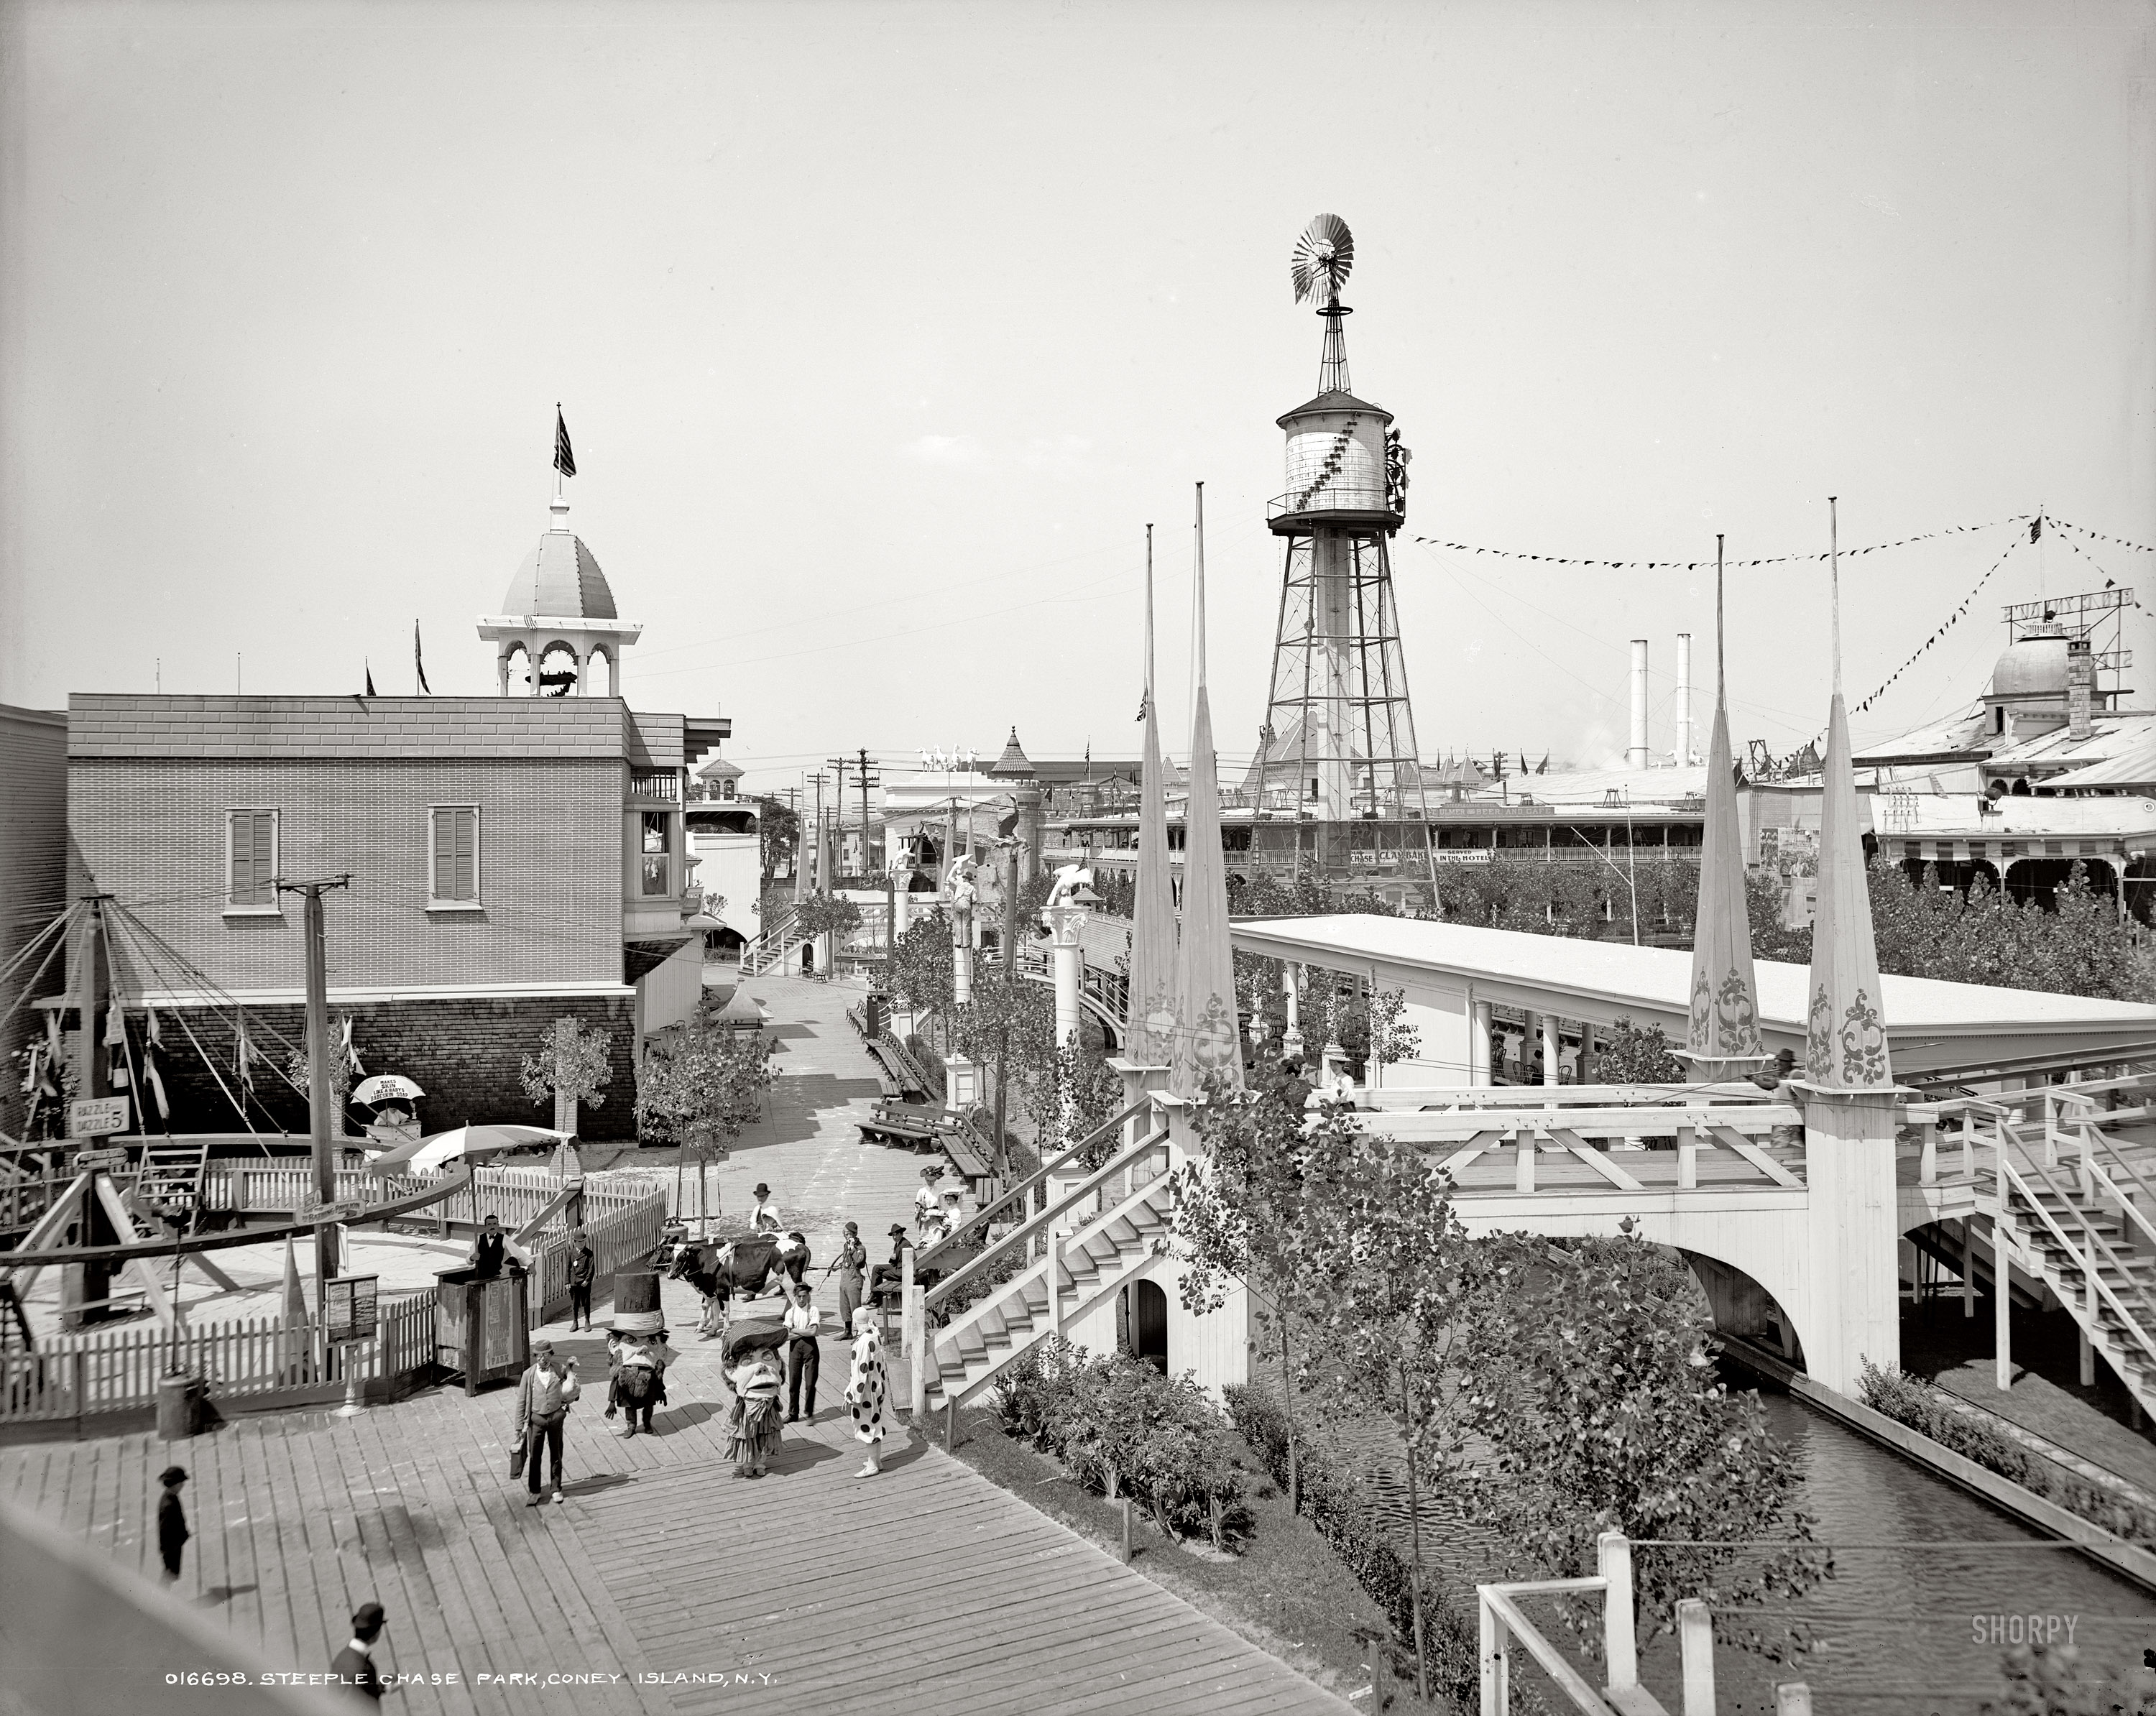 New York circa 1903. "Steeplechase Park, Coney Island." 8x10 inch dry plate glass negative, Detroit Publishing Company. View full size.